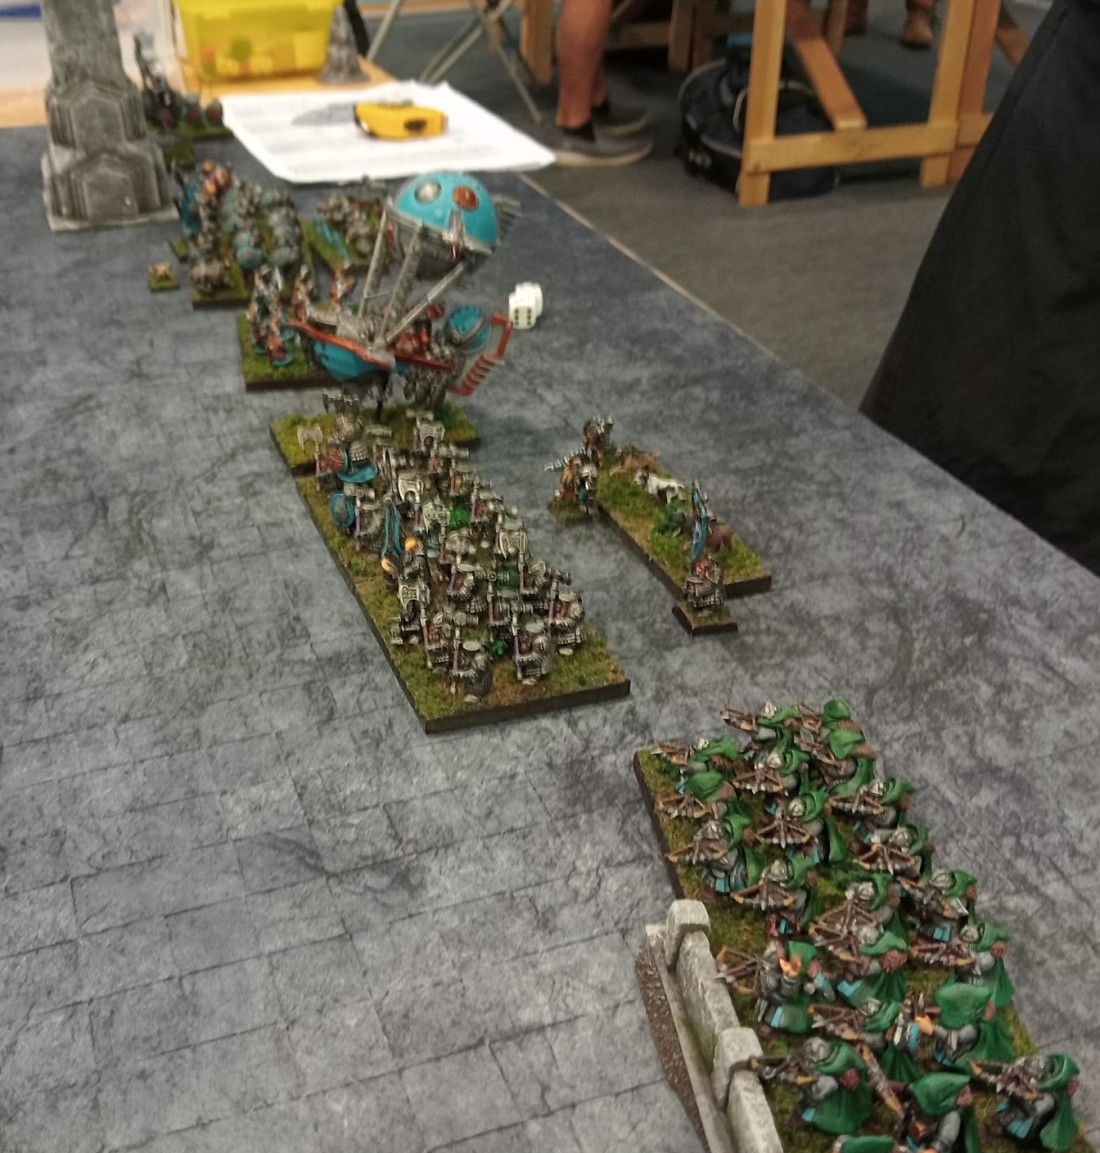 Battle reports – Vince on all things Kings of War